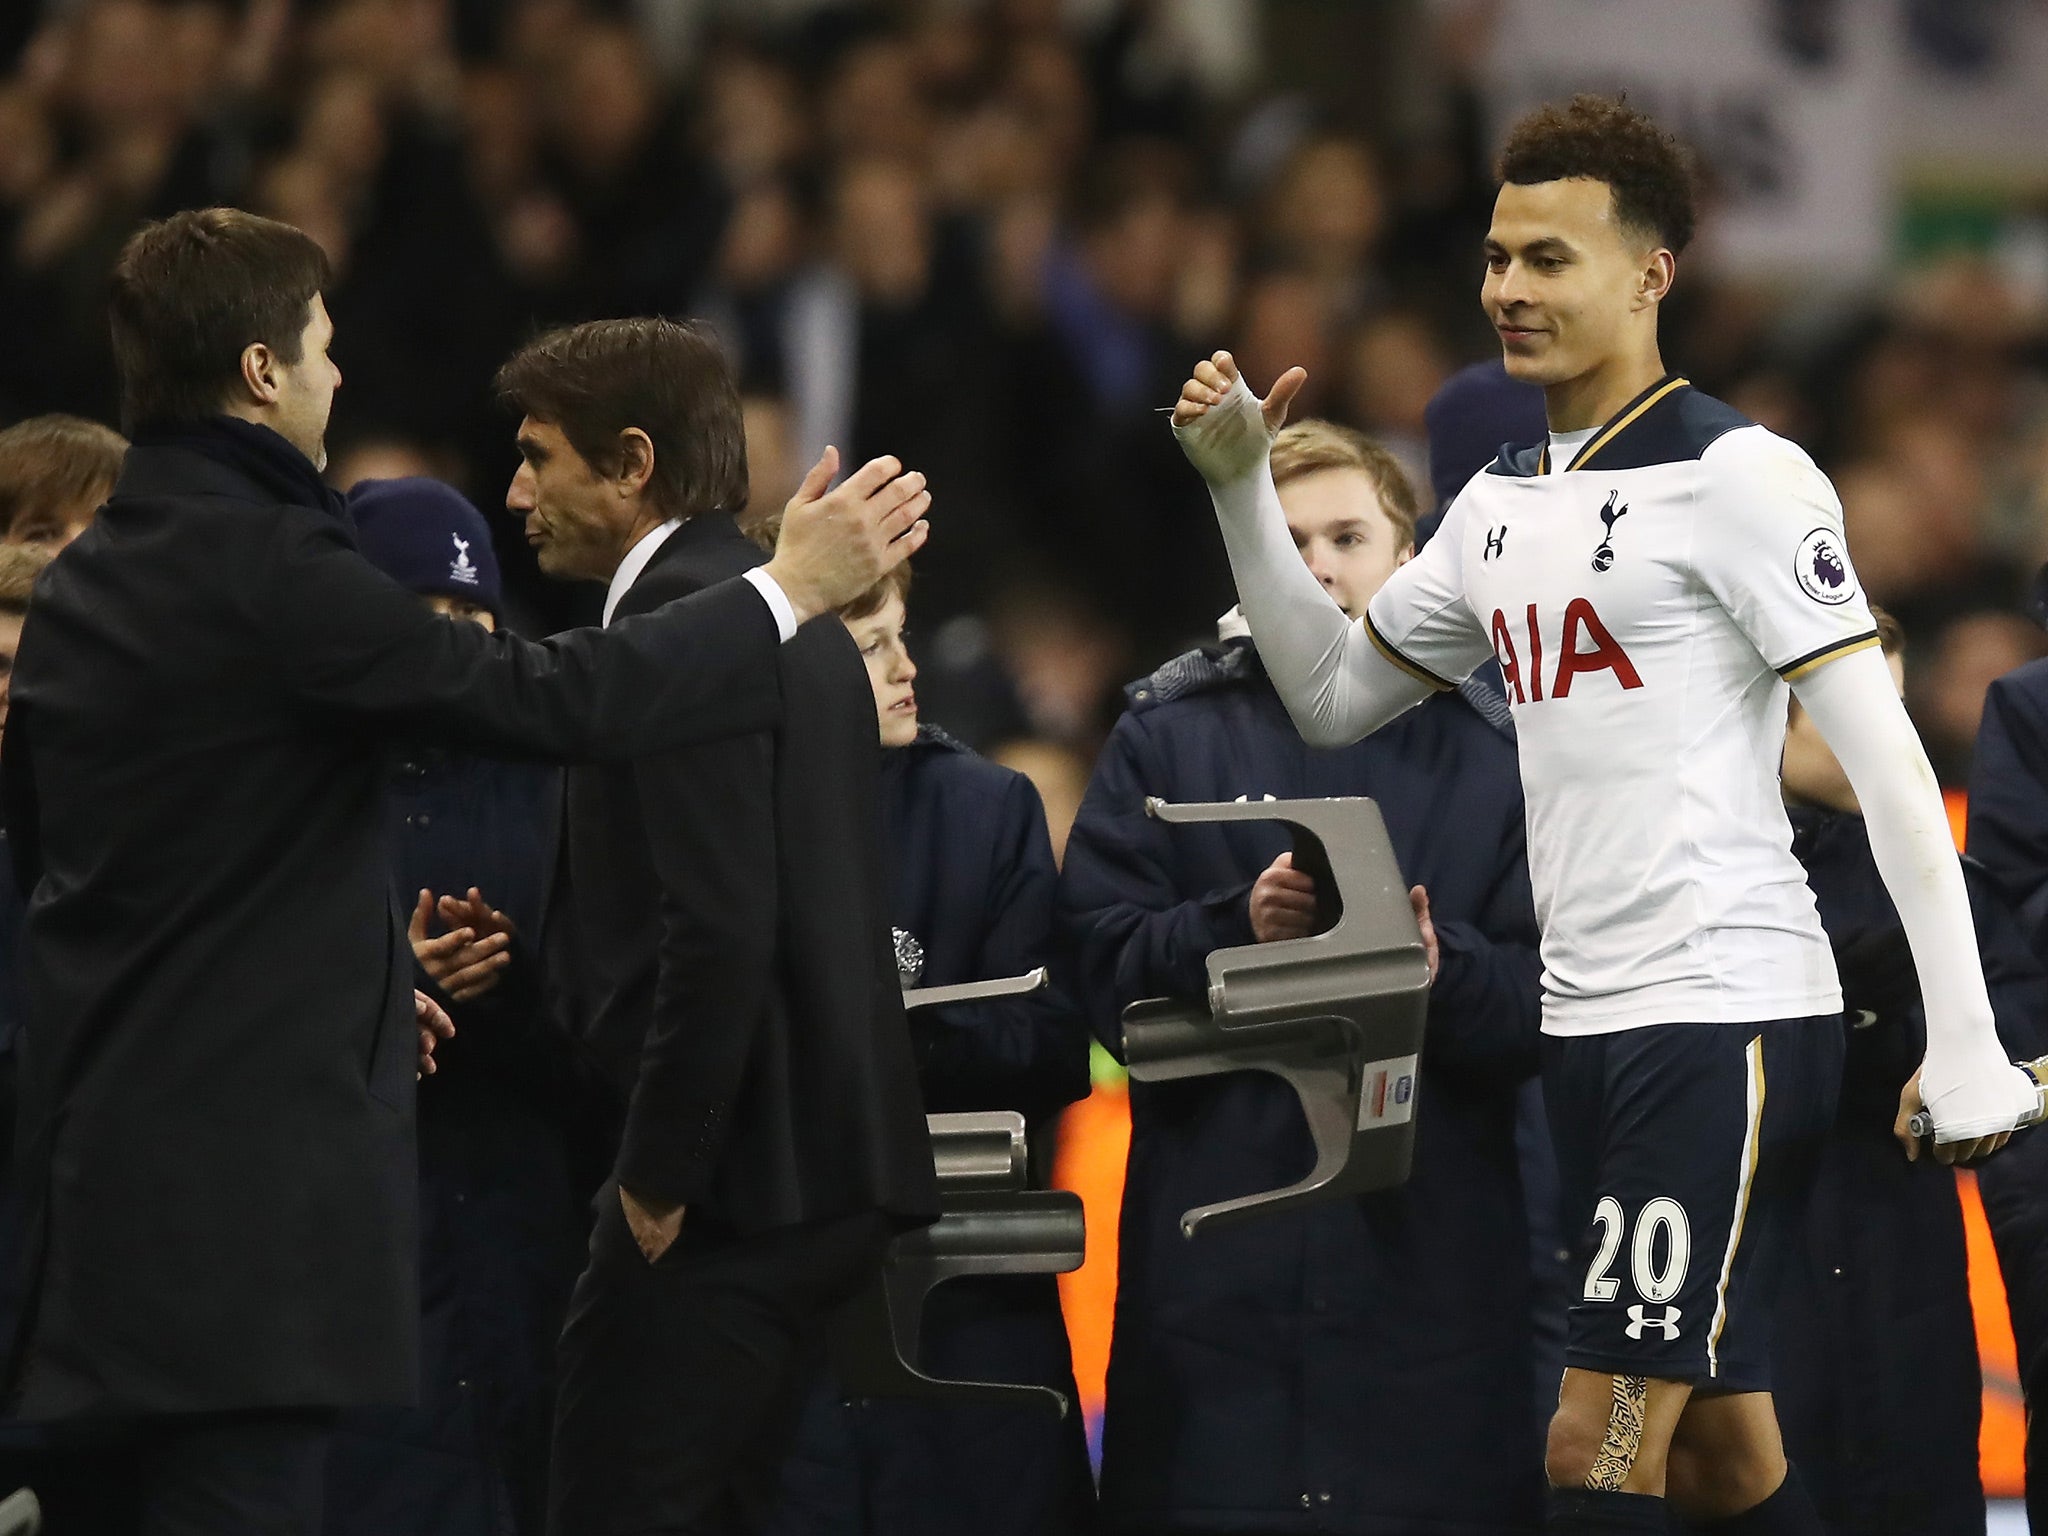 Pochettino's men will look to build on their fantastic win over Chelsea